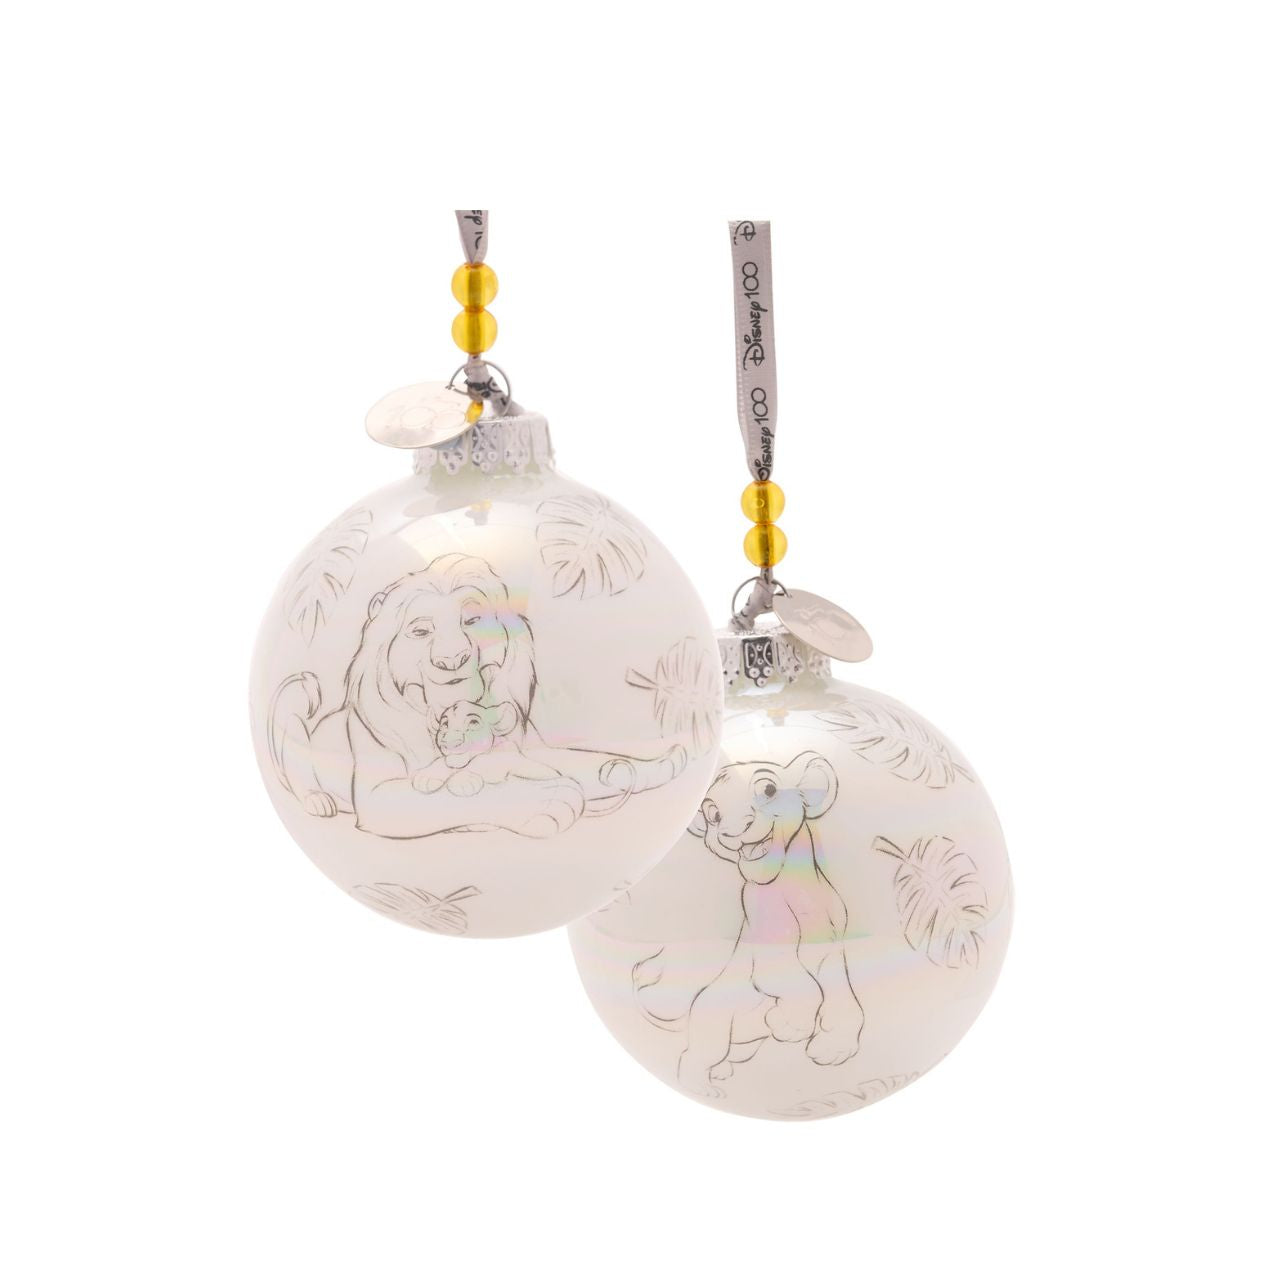 Disney 100th Anniversary Set of 4 Baubles - Classic  A set of 4 Classic baubles from Disney 100 by DISNEY.  These limited edition tree decorations capture the true magic of Disney on its centenary and can be enjoyed by fans of all ages at Christmas.